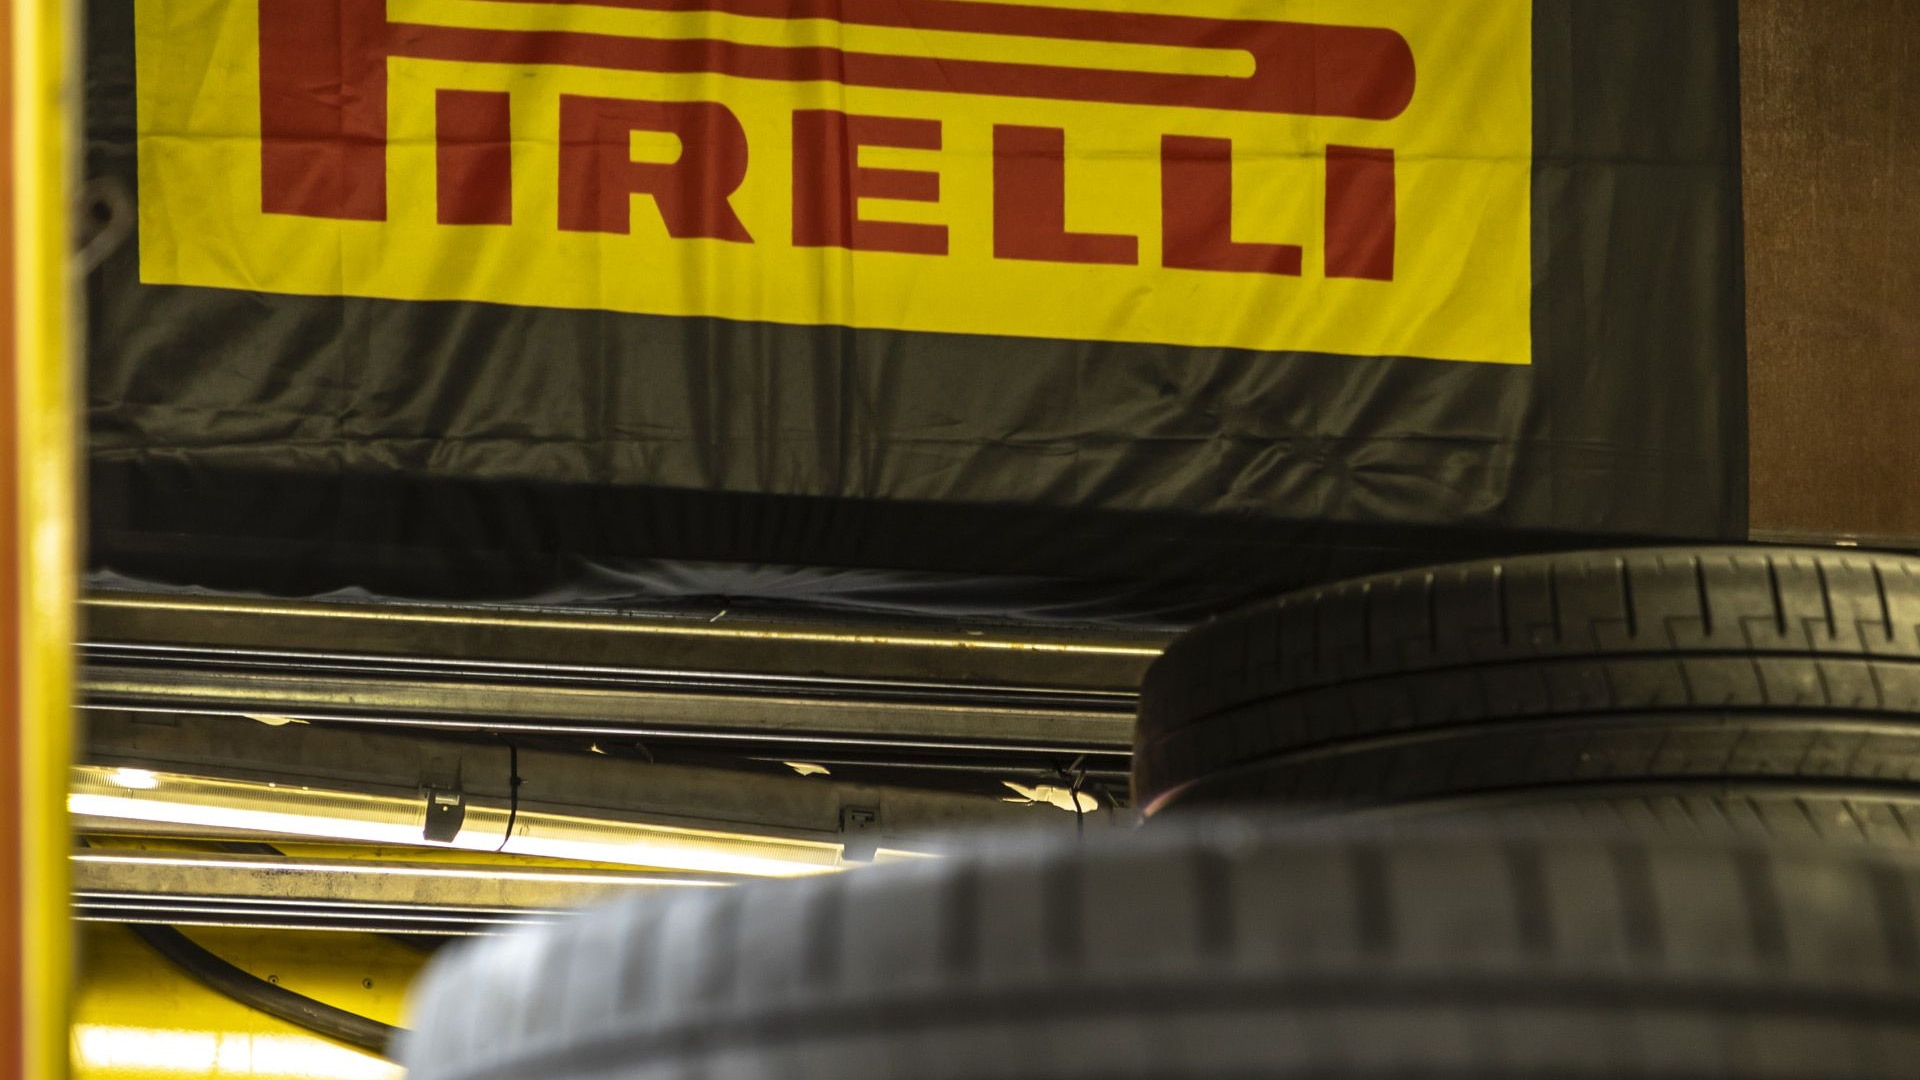 Ferrari and Pirelli developing new tires for classic supercars